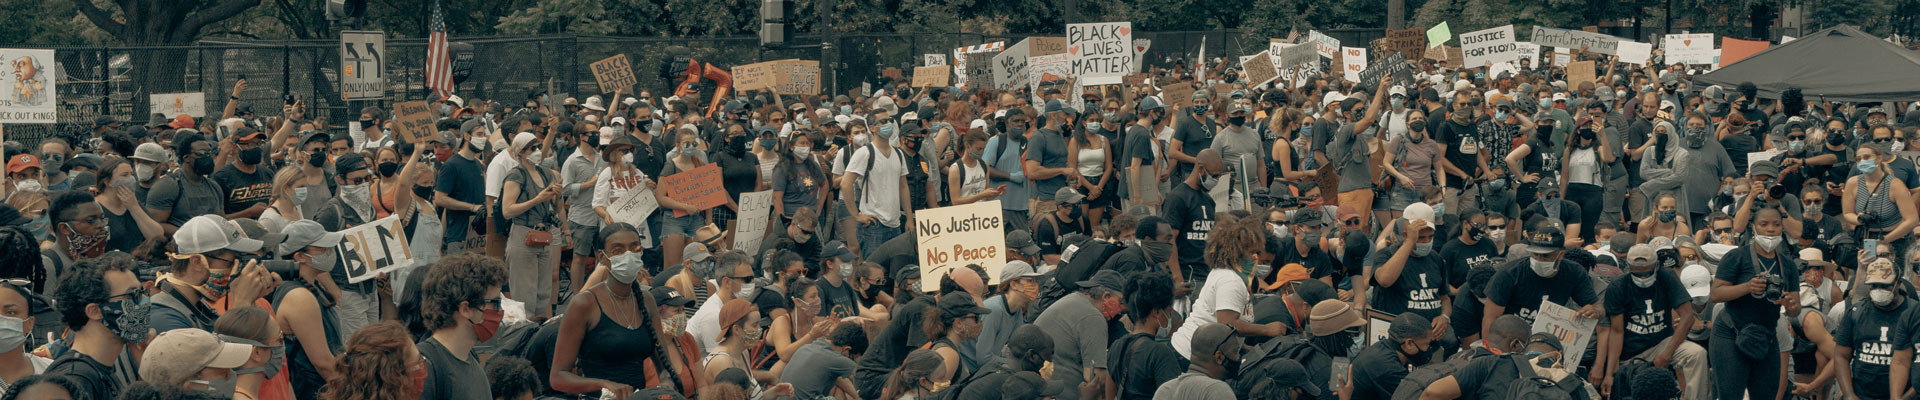 A crowd gathers at a Black Lives Matter protest.